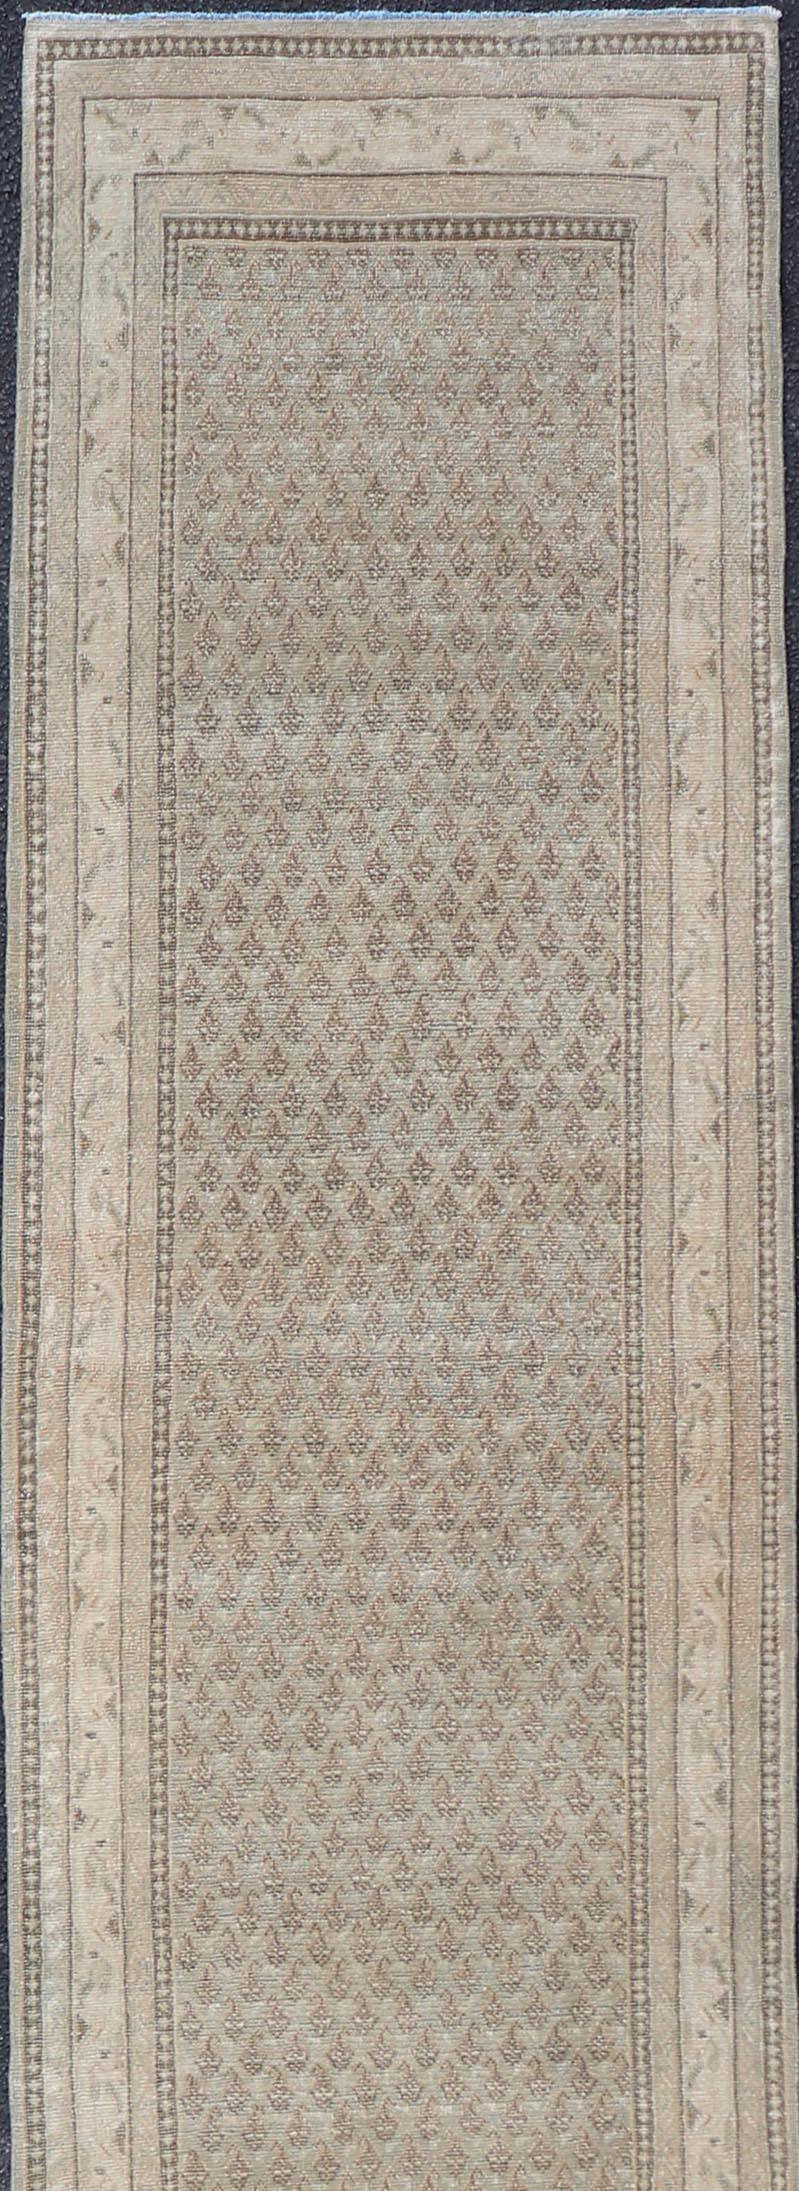 Long & Narrow Vintage Tabriz Runner with Taupe, Soft Blue-Gray, and Light Brown. Keivan Woven Arts / rug/ EN-14890,  Vintage Tabriz runner, mid-20th century. 
Measures: 2'6 x 13'5 
Persian Tabriz runner with a sophisticated design features a unique